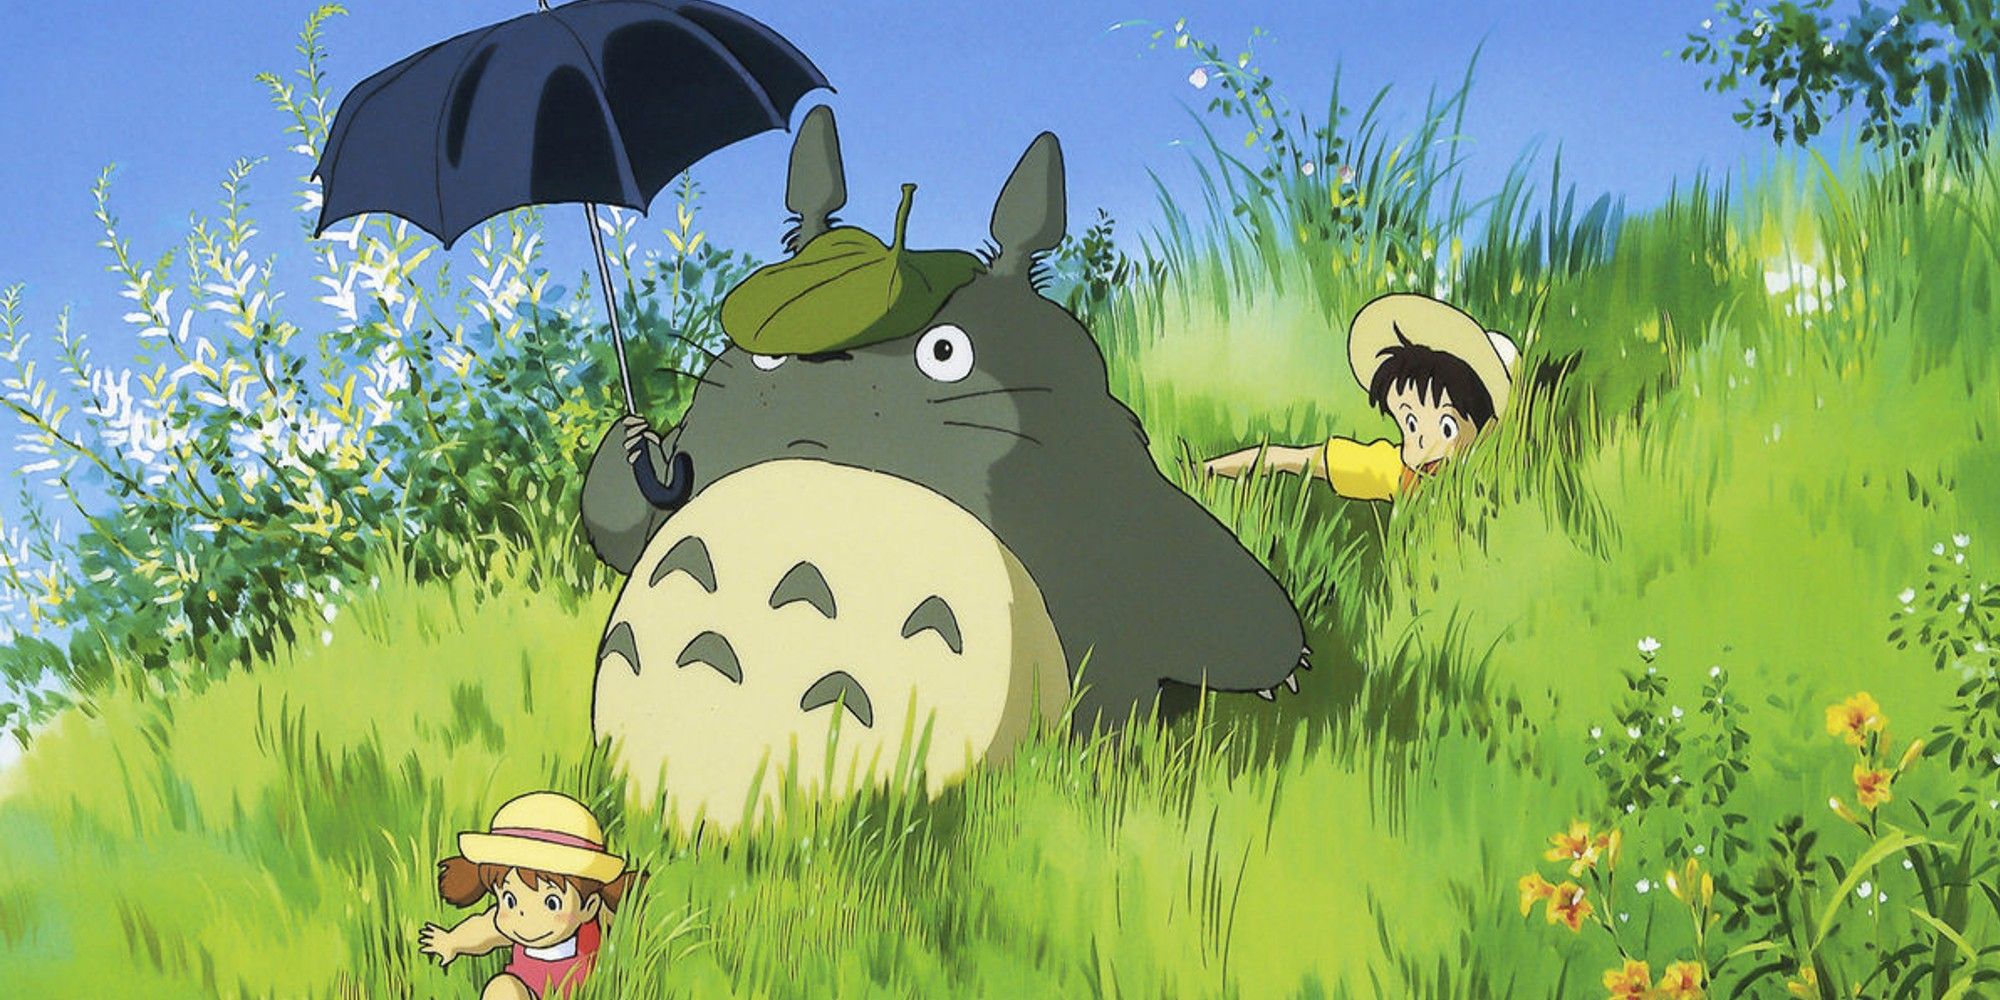 Totoro and the children sitting in a field in My Neighbour Totoro